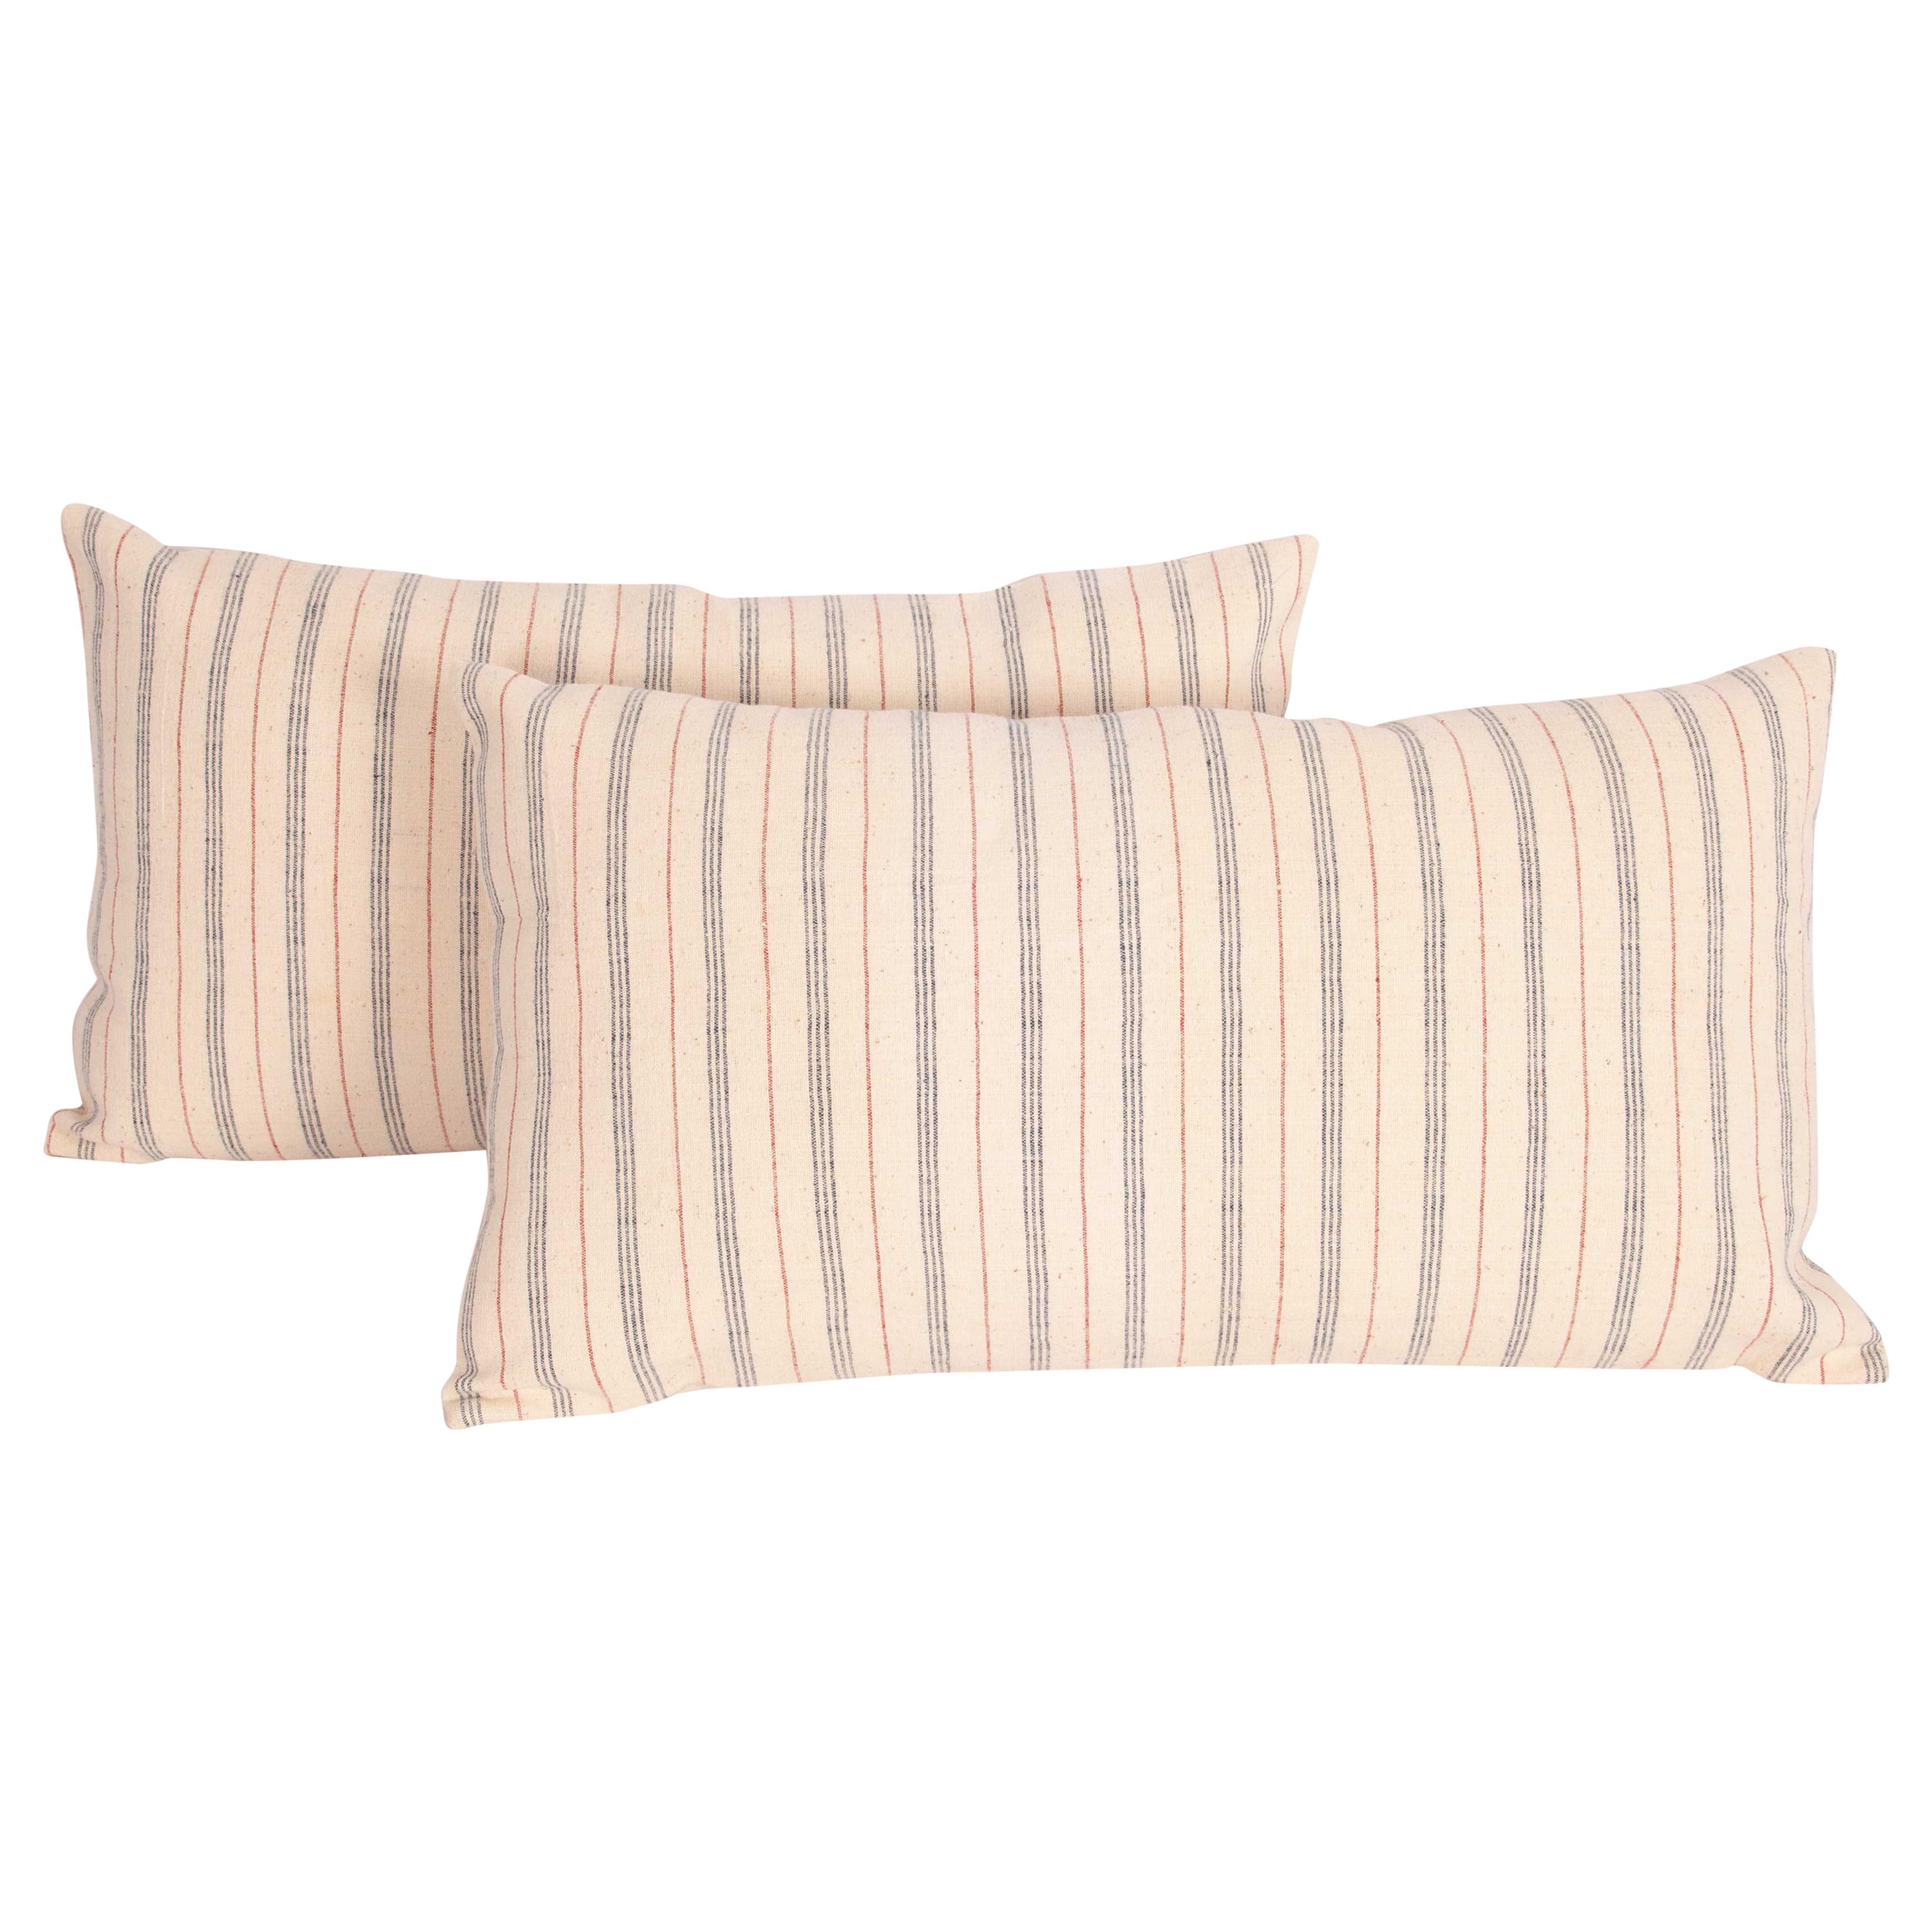 Linen and Cotton Pillow Cases Made from a Vintage Anatolian Handwoven Textile